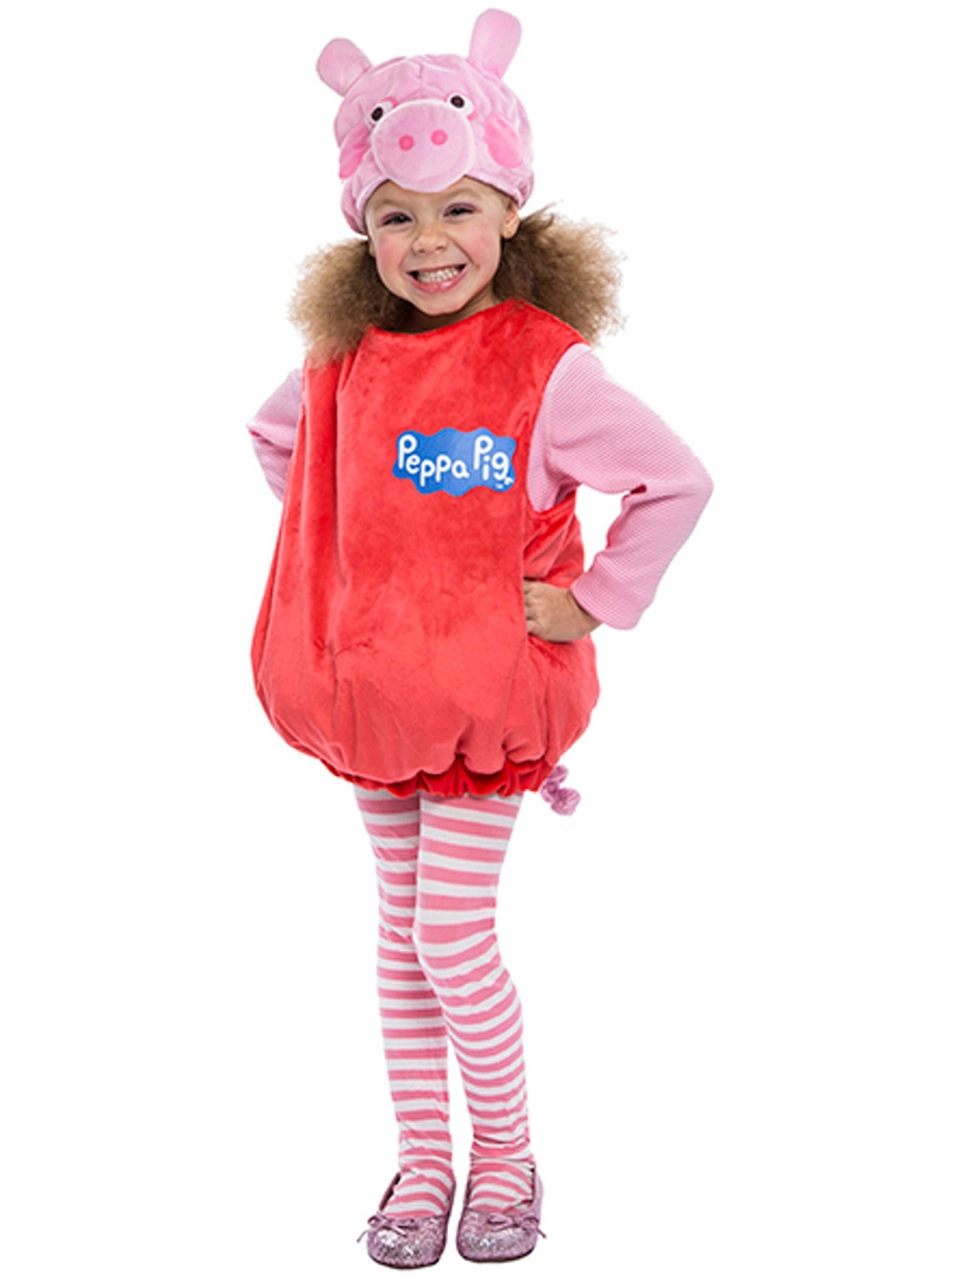 Peppa Pig Toddler Costume Bubble Dress